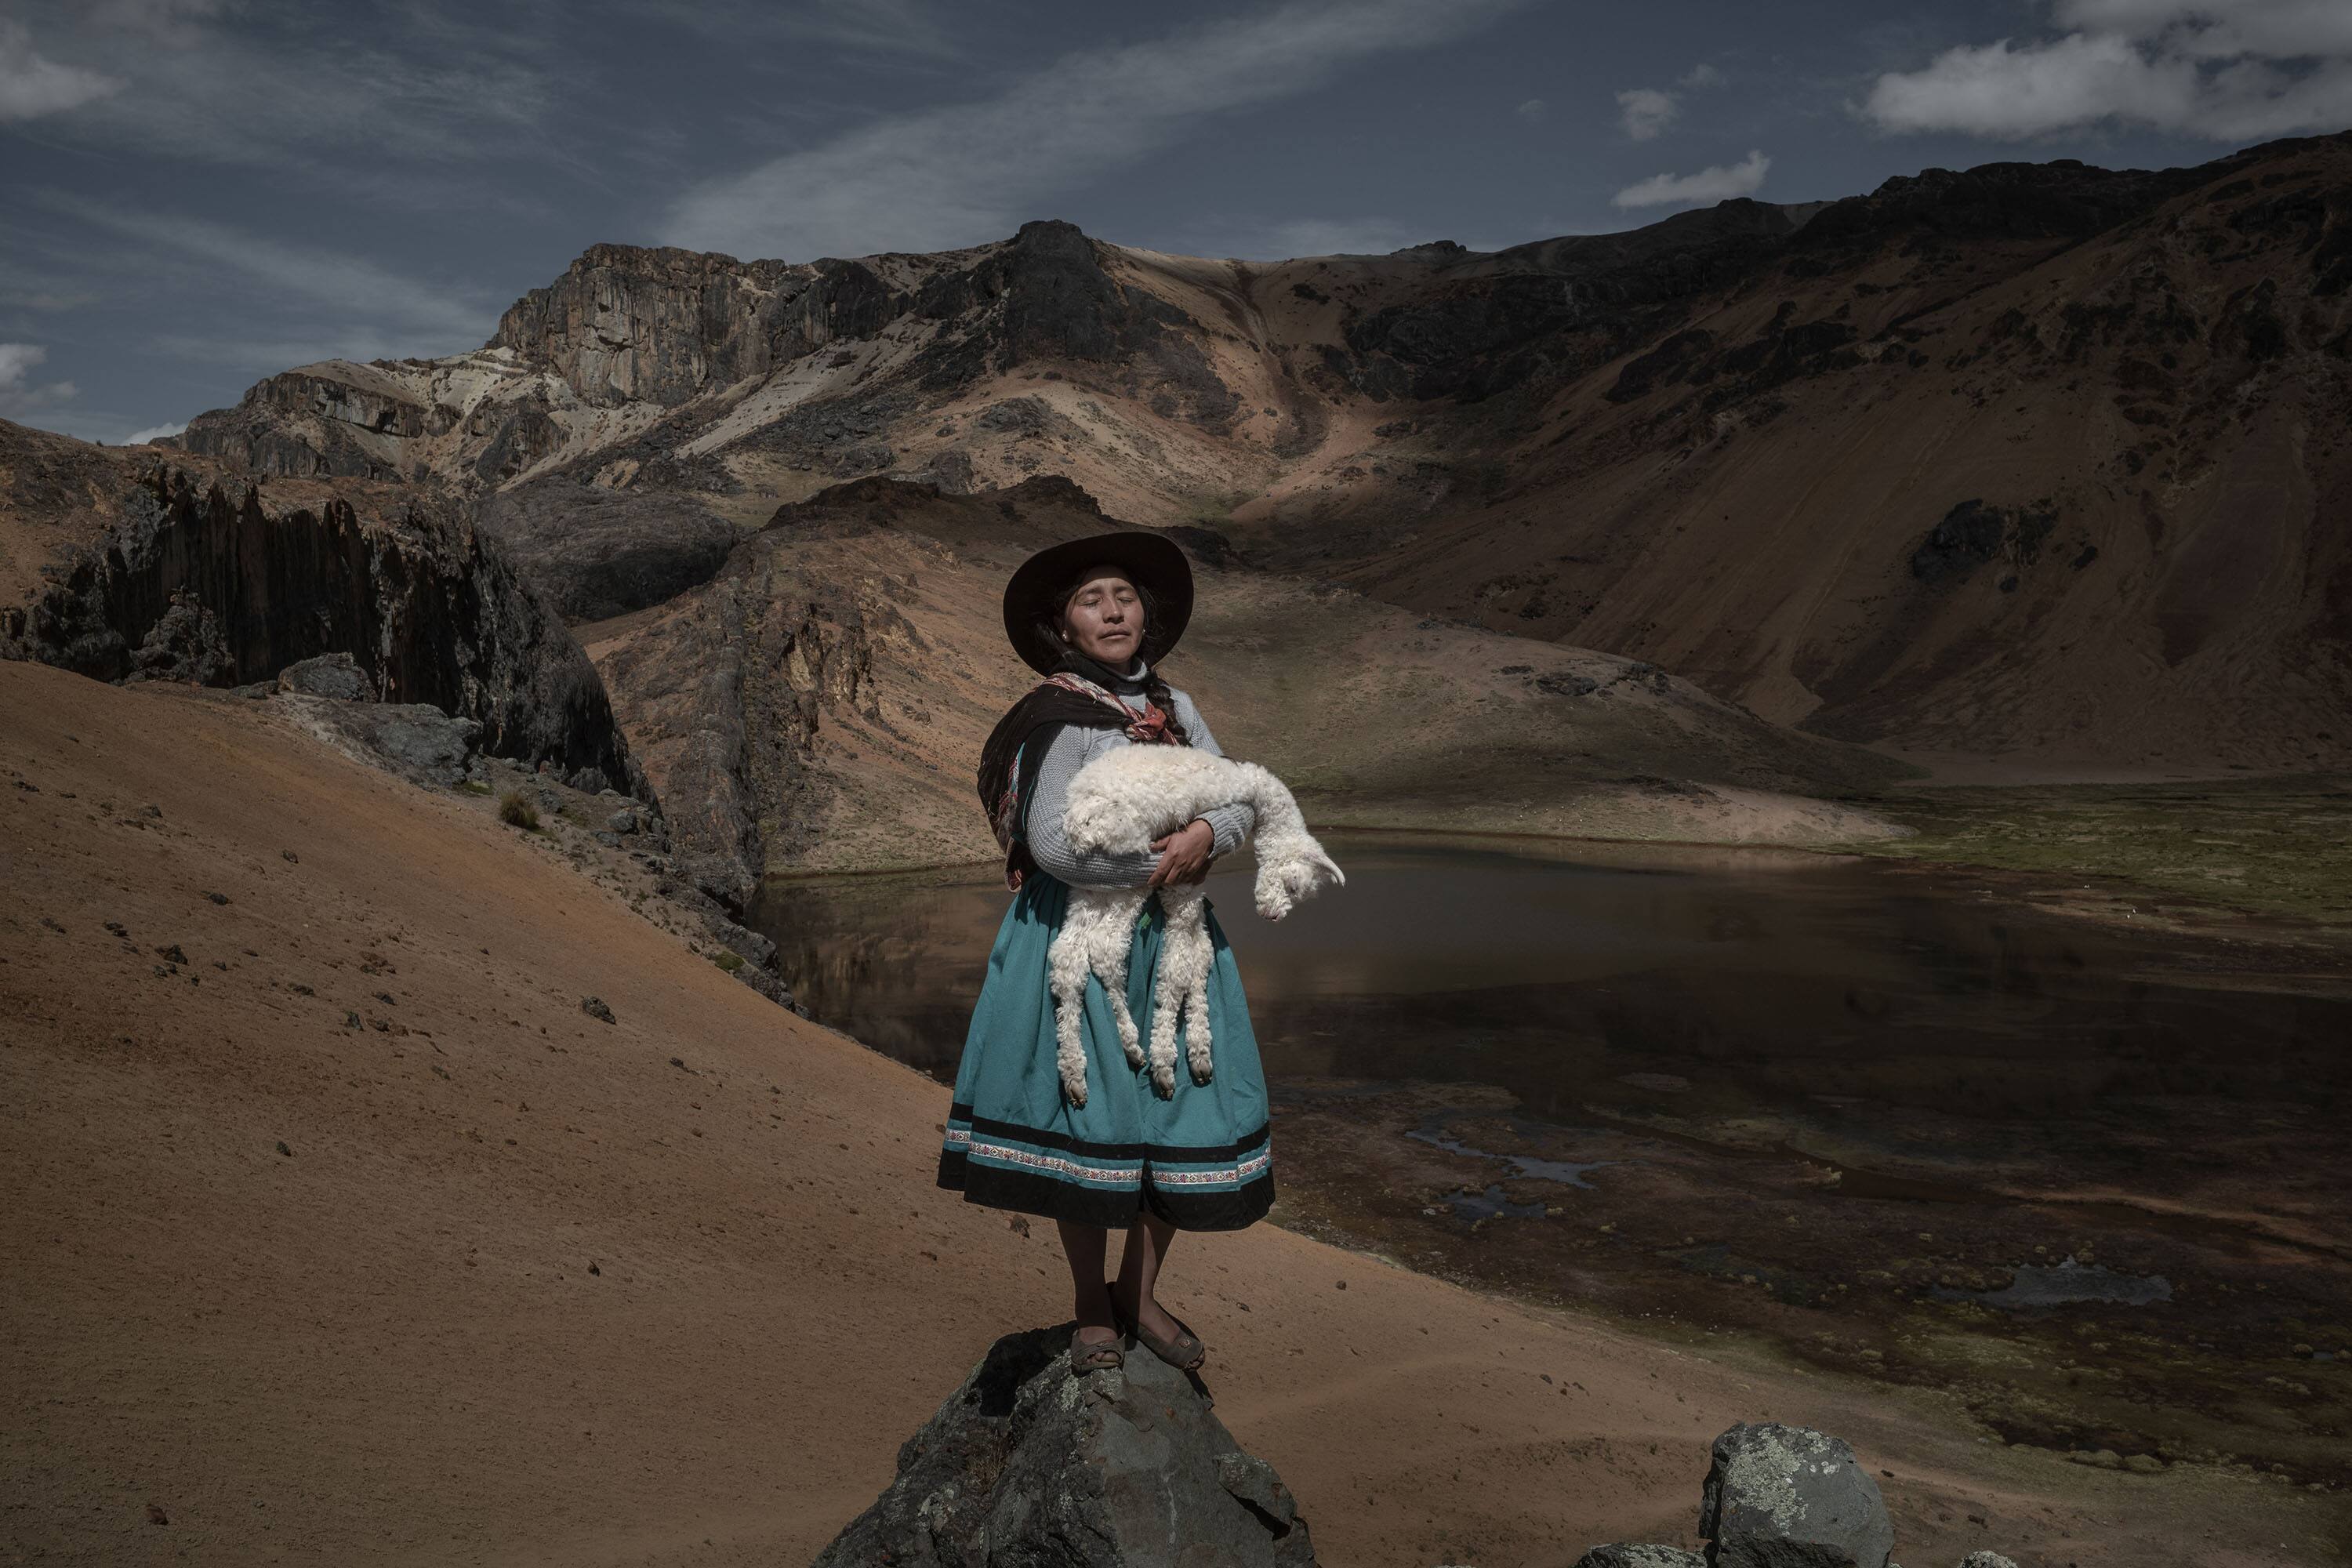 At an altitude of more than 5000 mt, in the Andes of southern Peru, Alina Surquislla Gomez, a third-generation Alpaquera, cradles a baby alpaca on her way to the pastures where her family’s herd of more than 300 animals will graze in summer. Shrinking glaciers and increased drought have dried pastures in the Andes, forcing the herders—many of whom are women—to search for new grazing grounds, often in difficult terrain. Prized for their wool, alpacas are important to Peruvian culture and a major source of income in this region, which is home to several million of them. In the interview, Surquislla Gomez says: " When I was little, my grandfather used to tell me how beautiful it was to graze in these valleys, due to climate change the situation has changed, we can no longer live like before and I am forced to make many sacrifices, but this is my life and my work and thanks to this I am able to support my children."